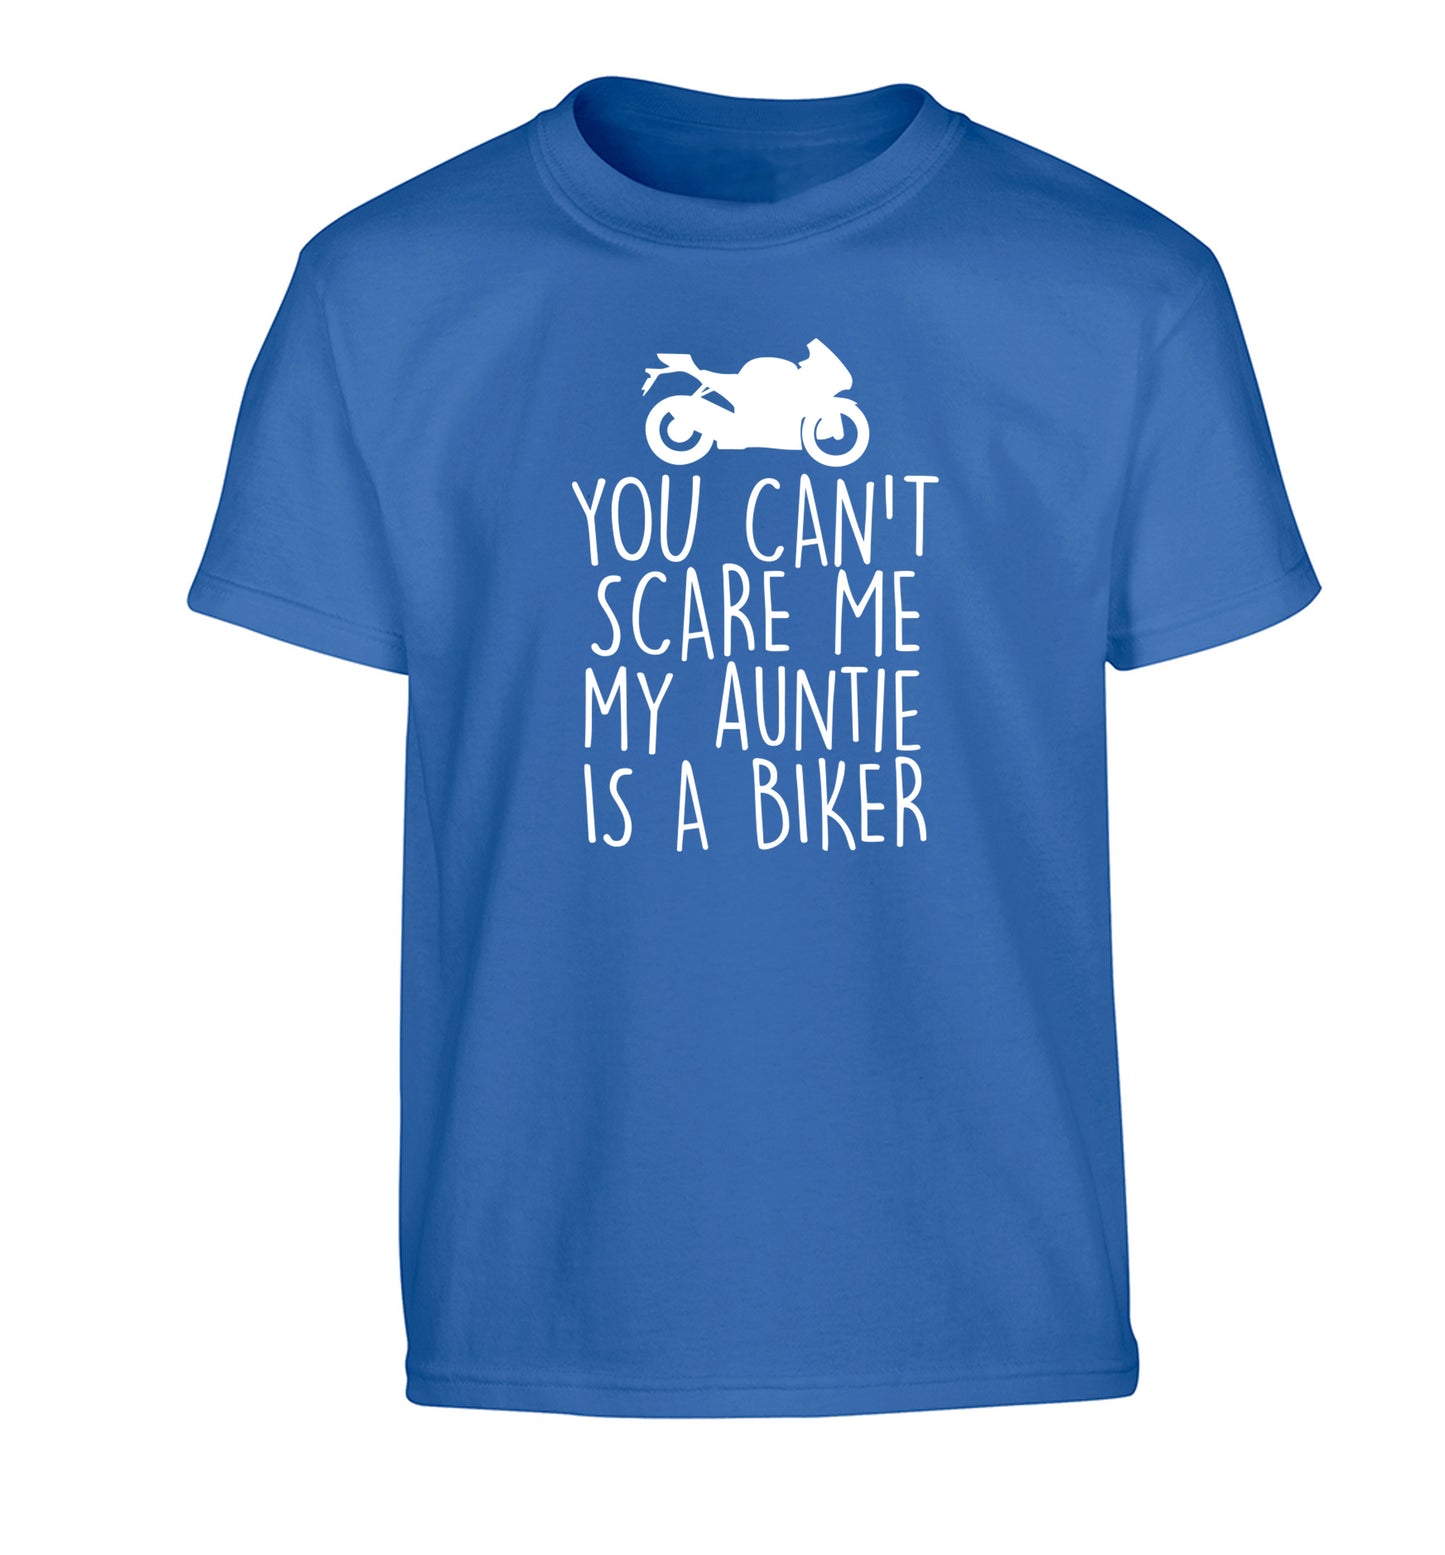 You can't scare me my auntie is a biker Children's blue Tshirt 12-13 Years